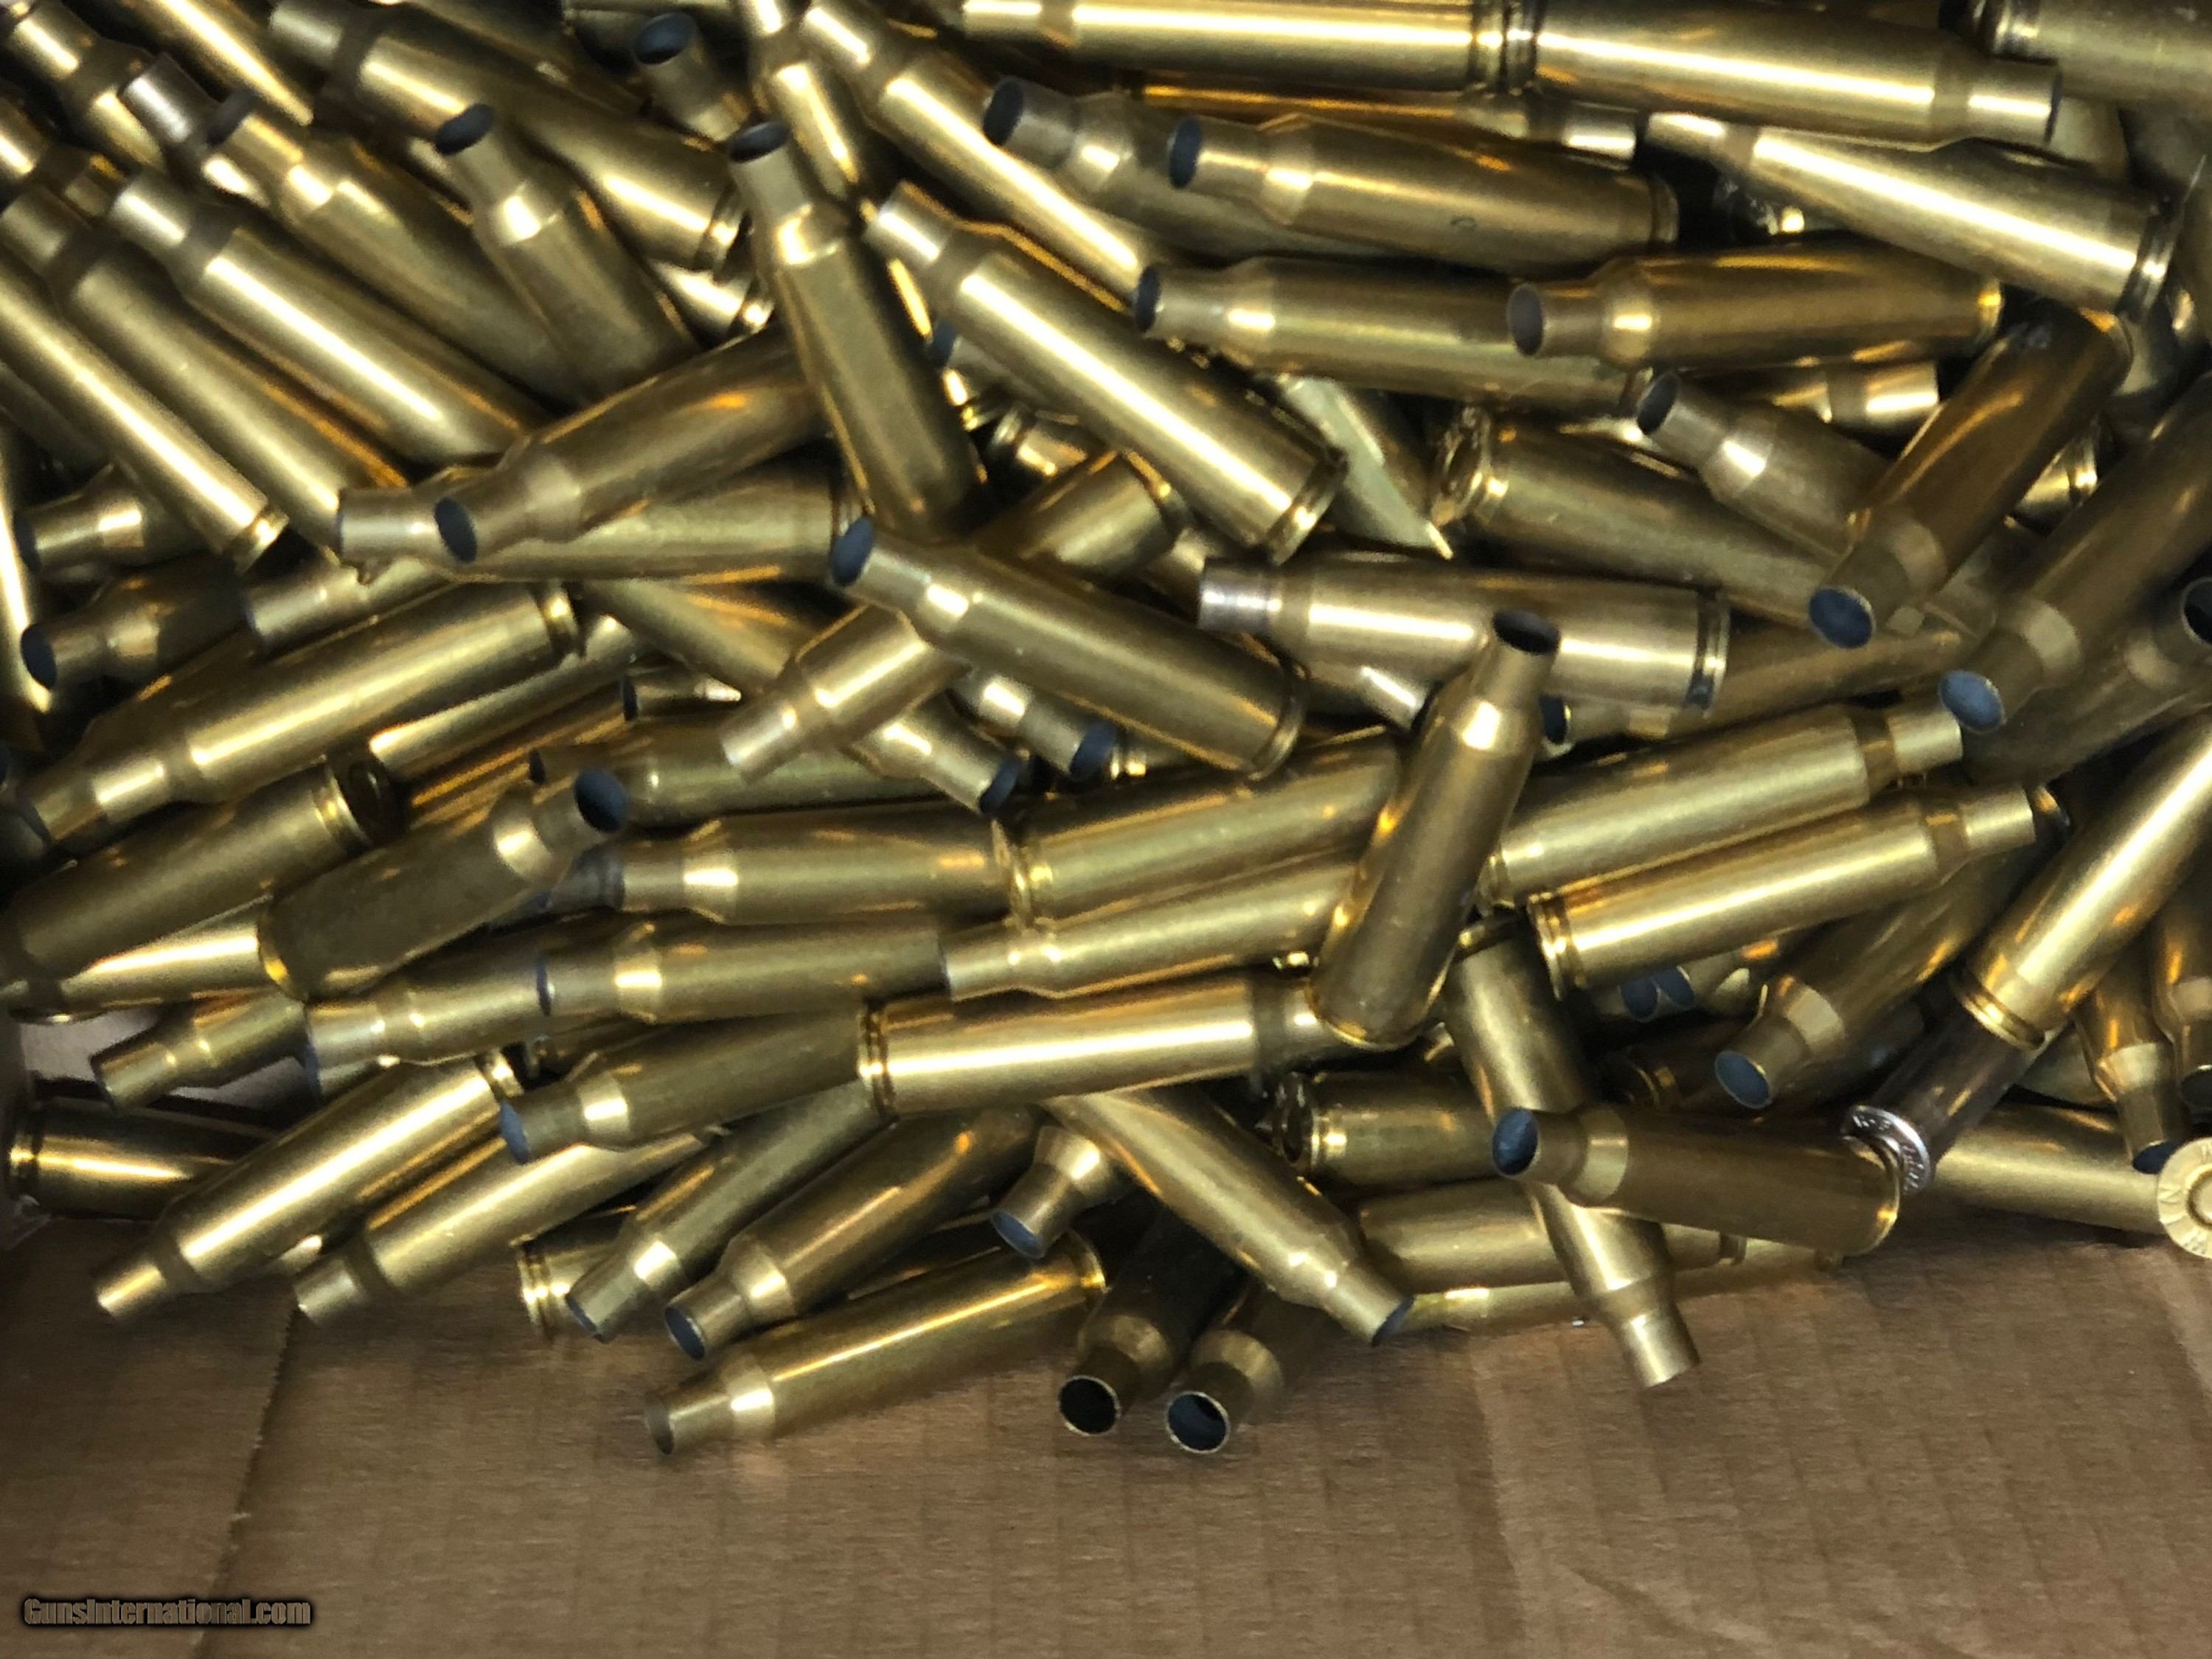 Winchester 22-250 Primed Brass 240 pieces